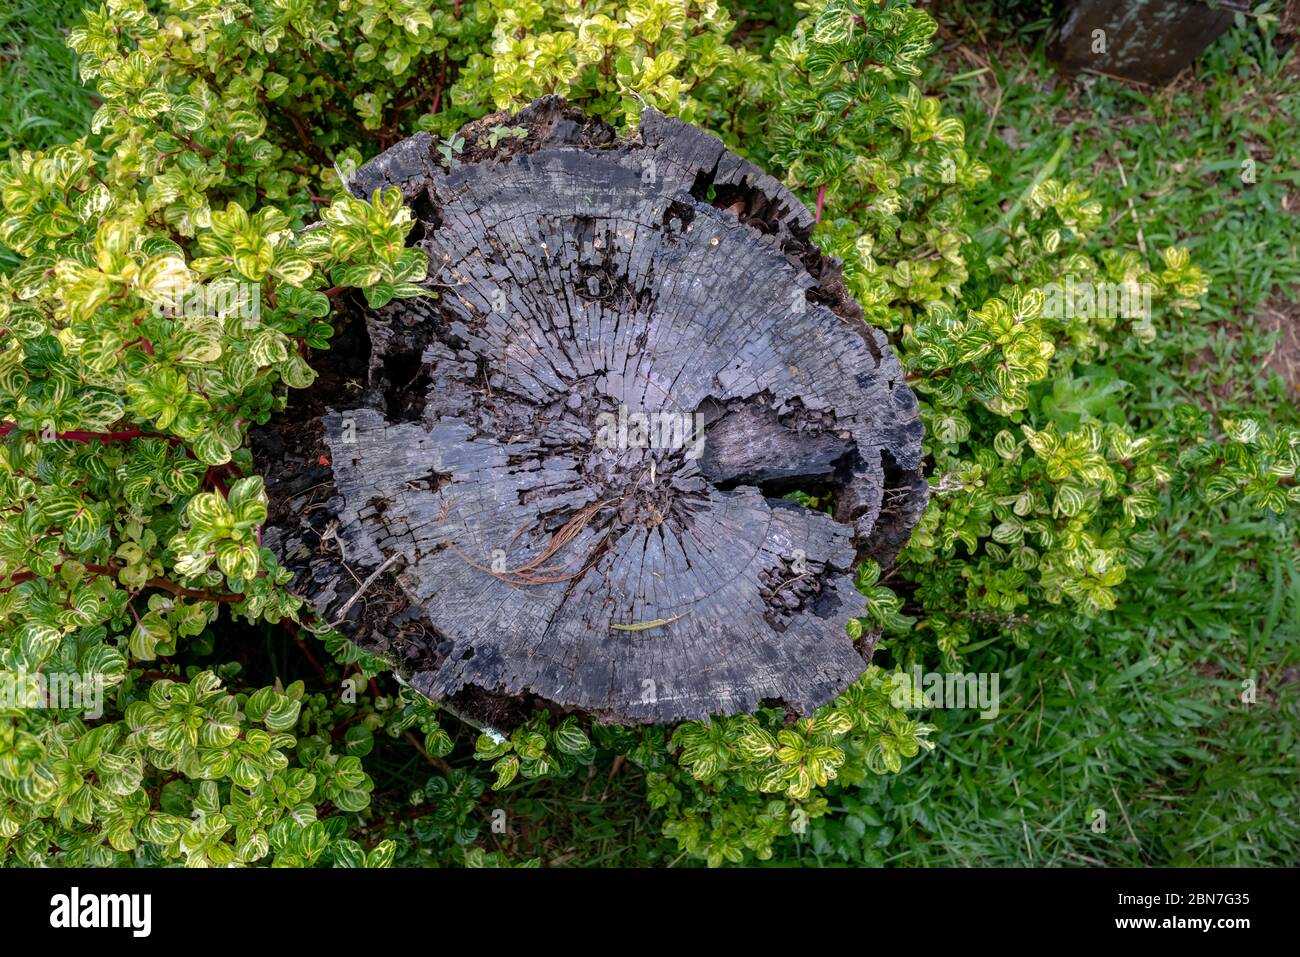 Dry and cut trunk surrounded by the Iresine herbstii plant in a grassy garden, Areal, Rio de Janeiro, Brazil Stock Photo